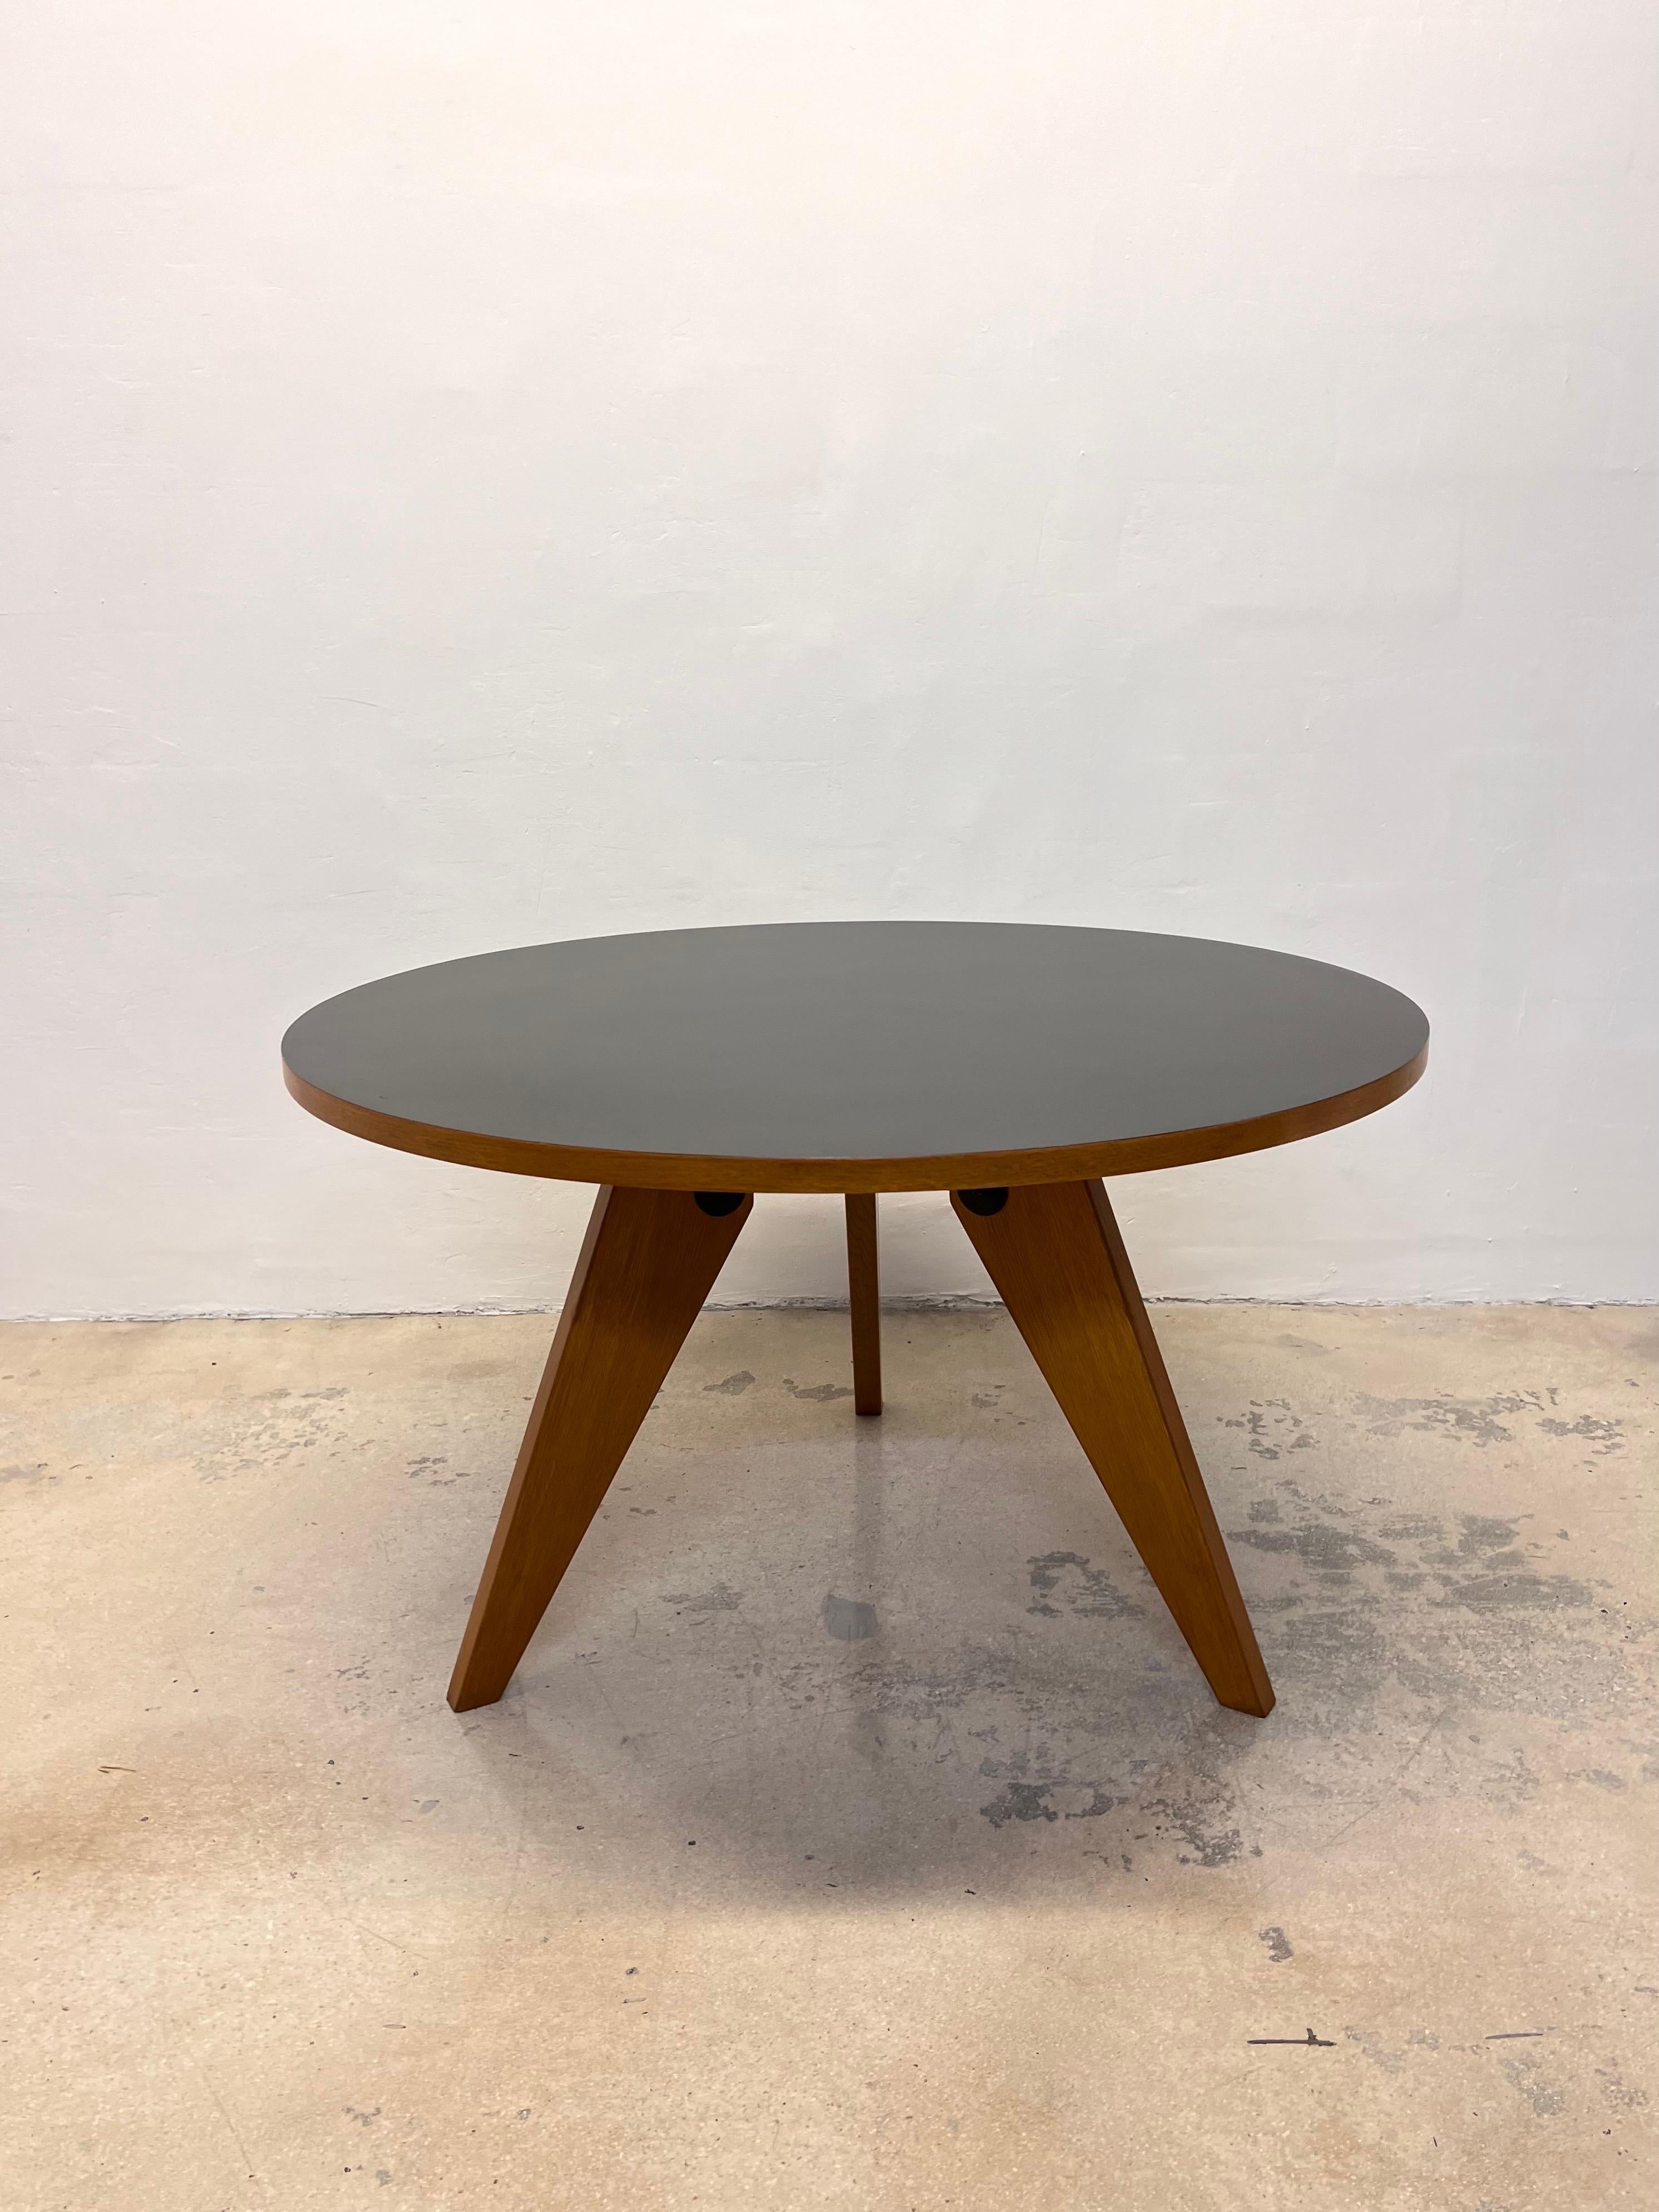 Out-of-production Jean Prouve designed Geuridon dining or center table with 47-1/2